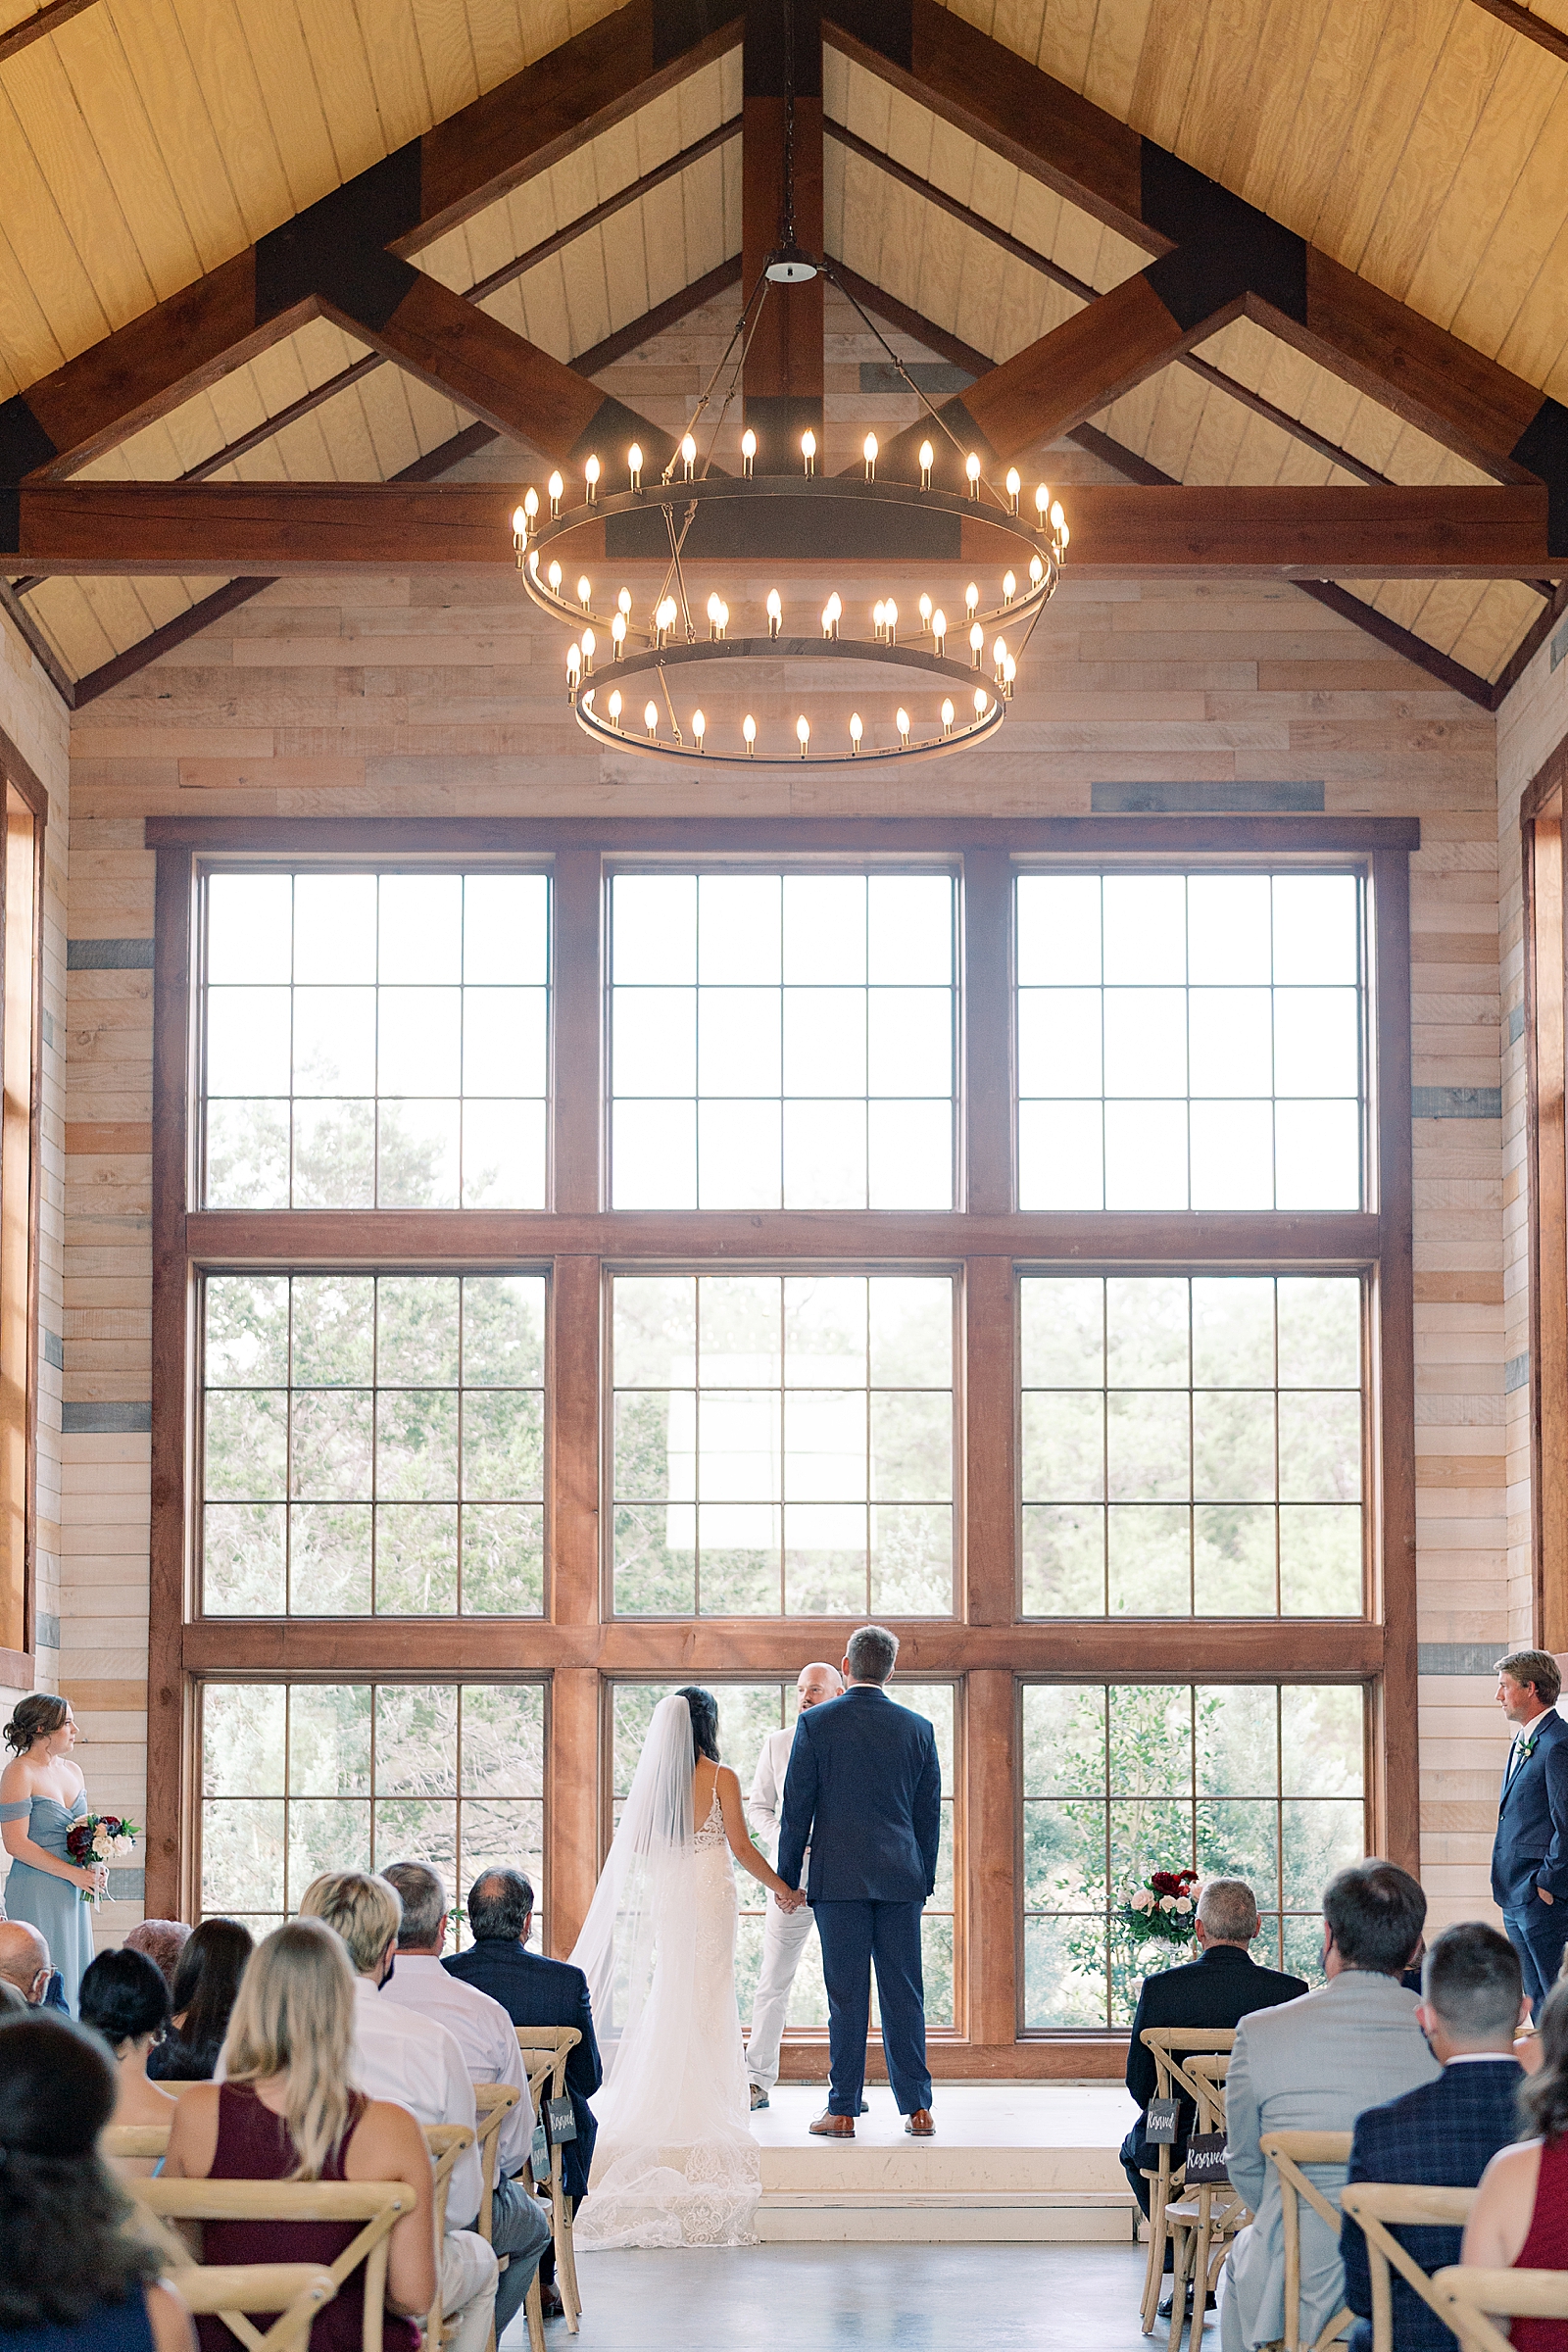 This navy, light gray, with pops of burgundy wedding day is some serious color palette inspo! In Dripping Springs, Texas at Saddle Creek Weddings, this day was full of elegance, fun and thoughtful details. Click through to see all the pretty! #weddingdayinspiration #dustybluewedding #austintexaswedding #hillcountrywedding 